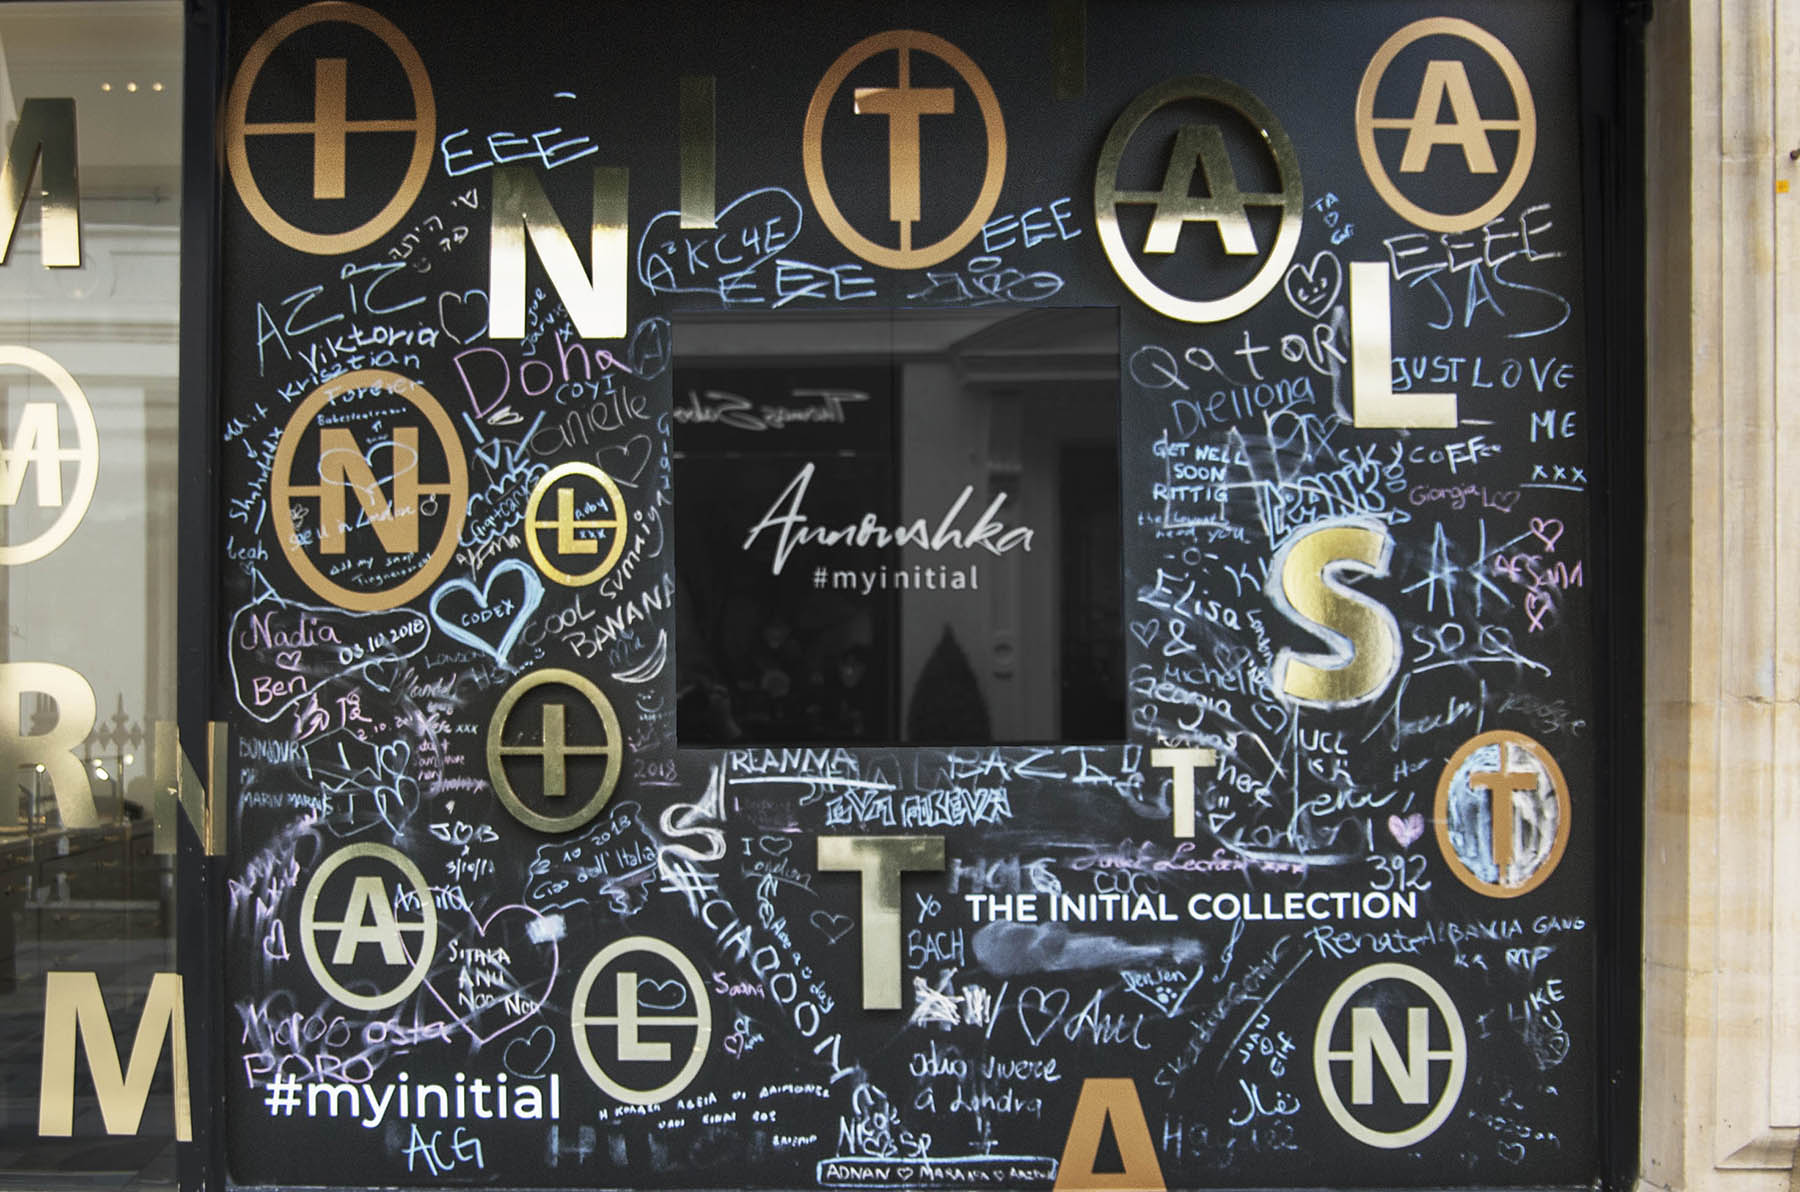 Annoushka Initials window display - chalkboard with writing and gold and copper letters spelling Initials